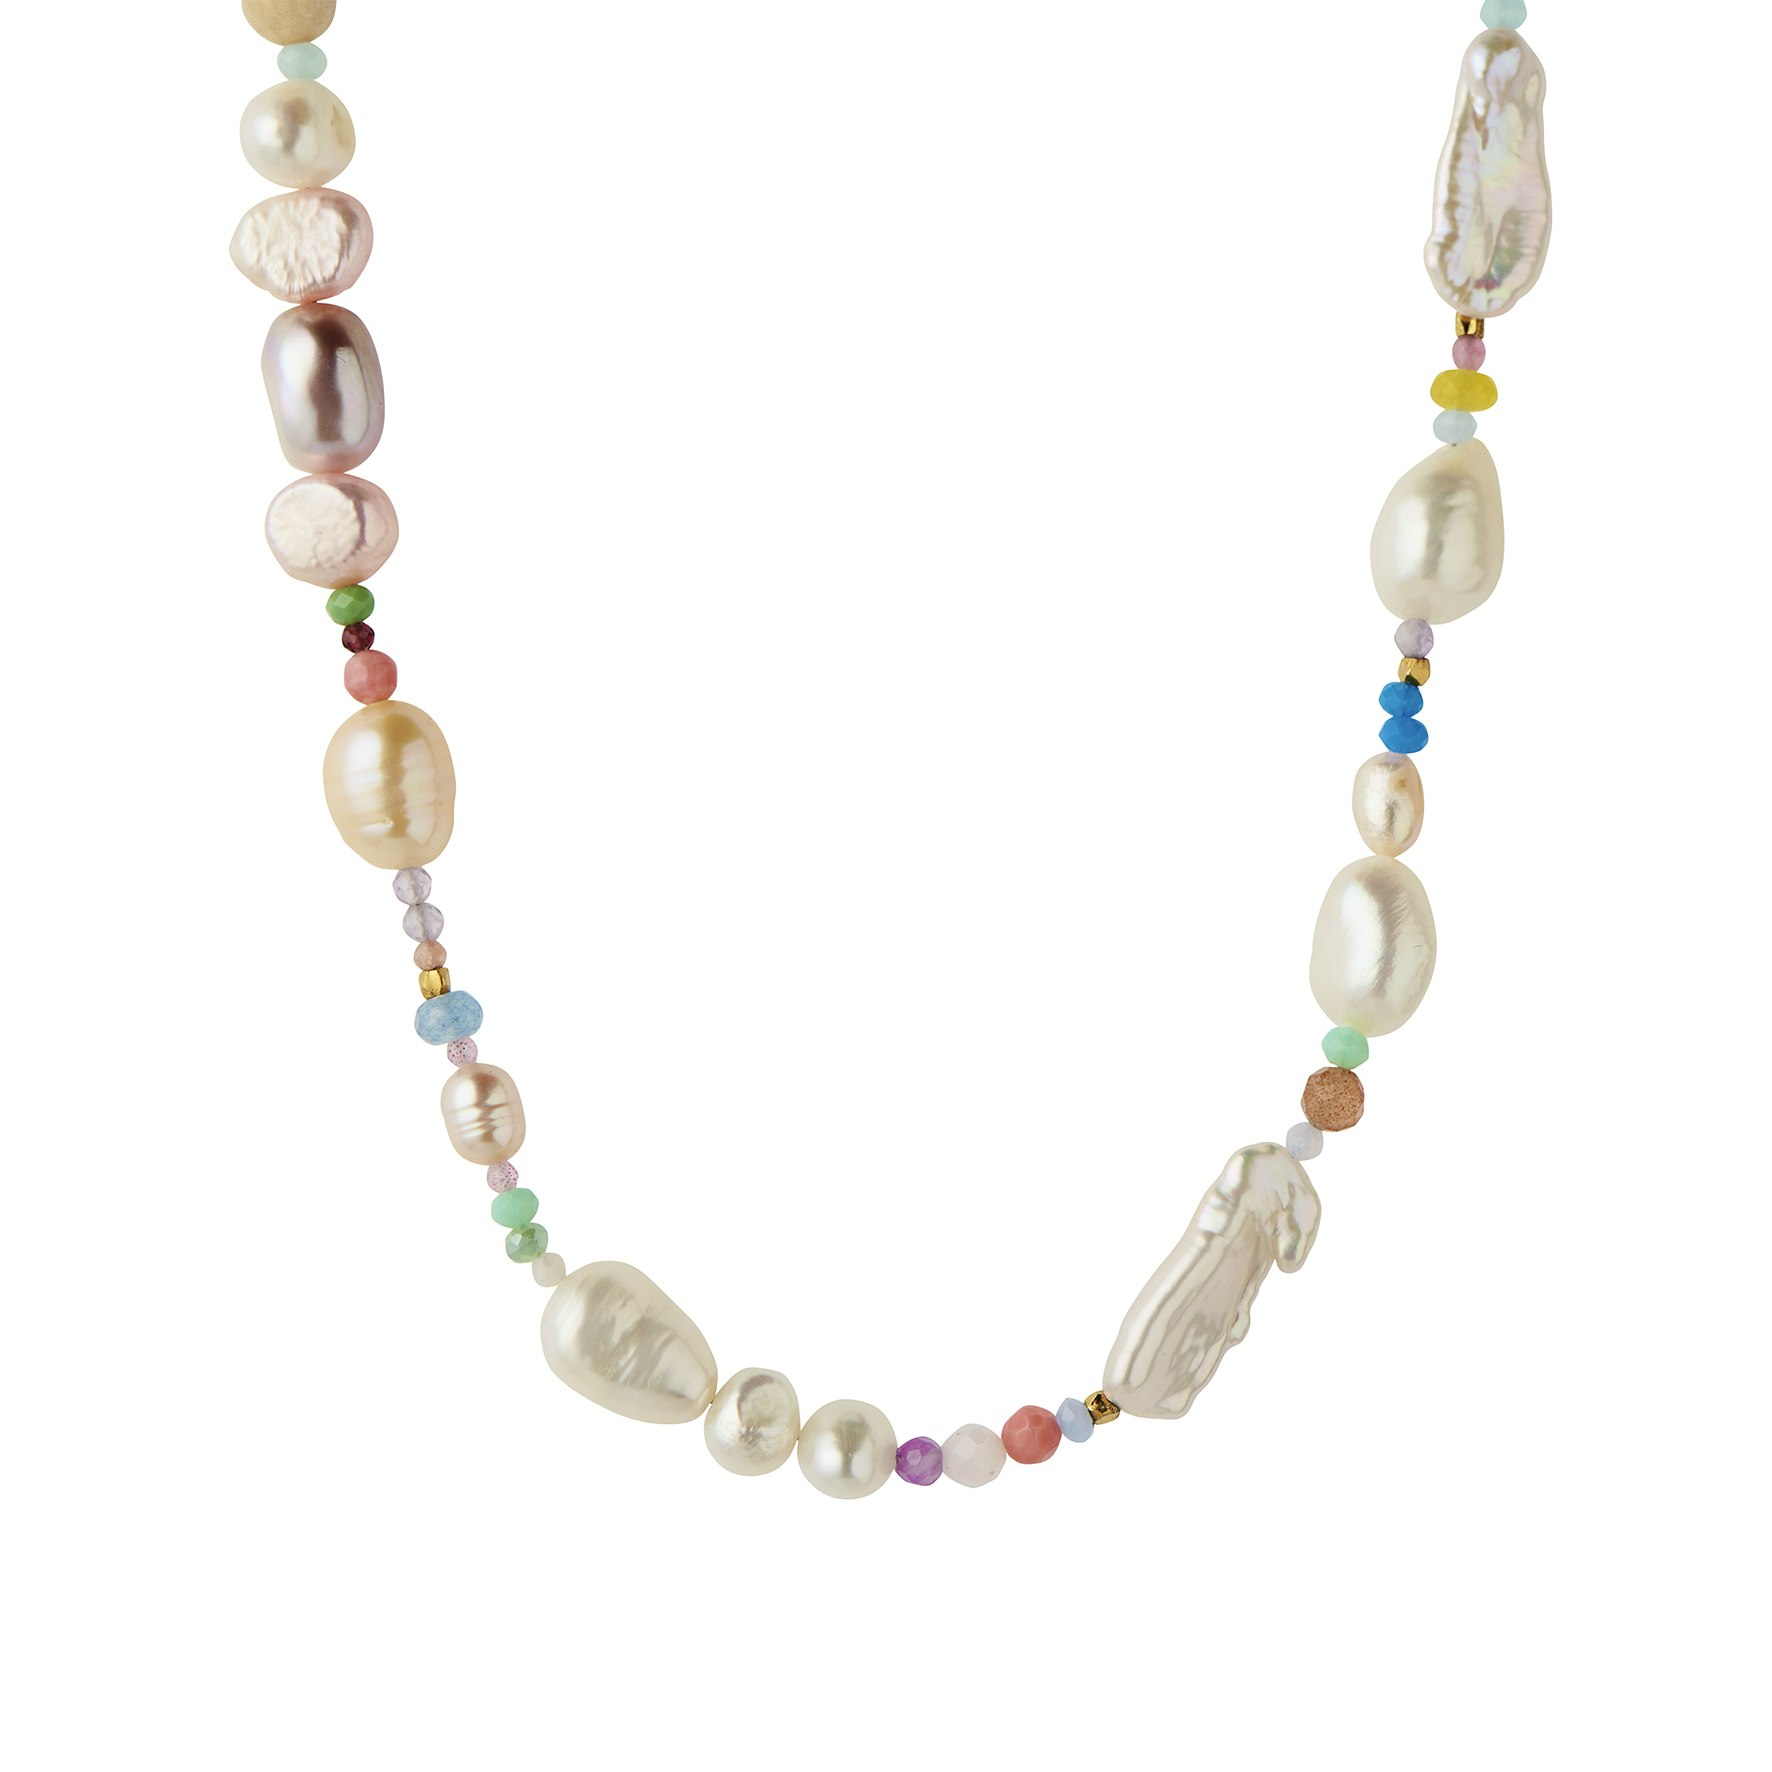 Cherry Garden Necklace - Pale Pastel Mix from STINE A Jewelry in Goldplated-Silver Sterling 925